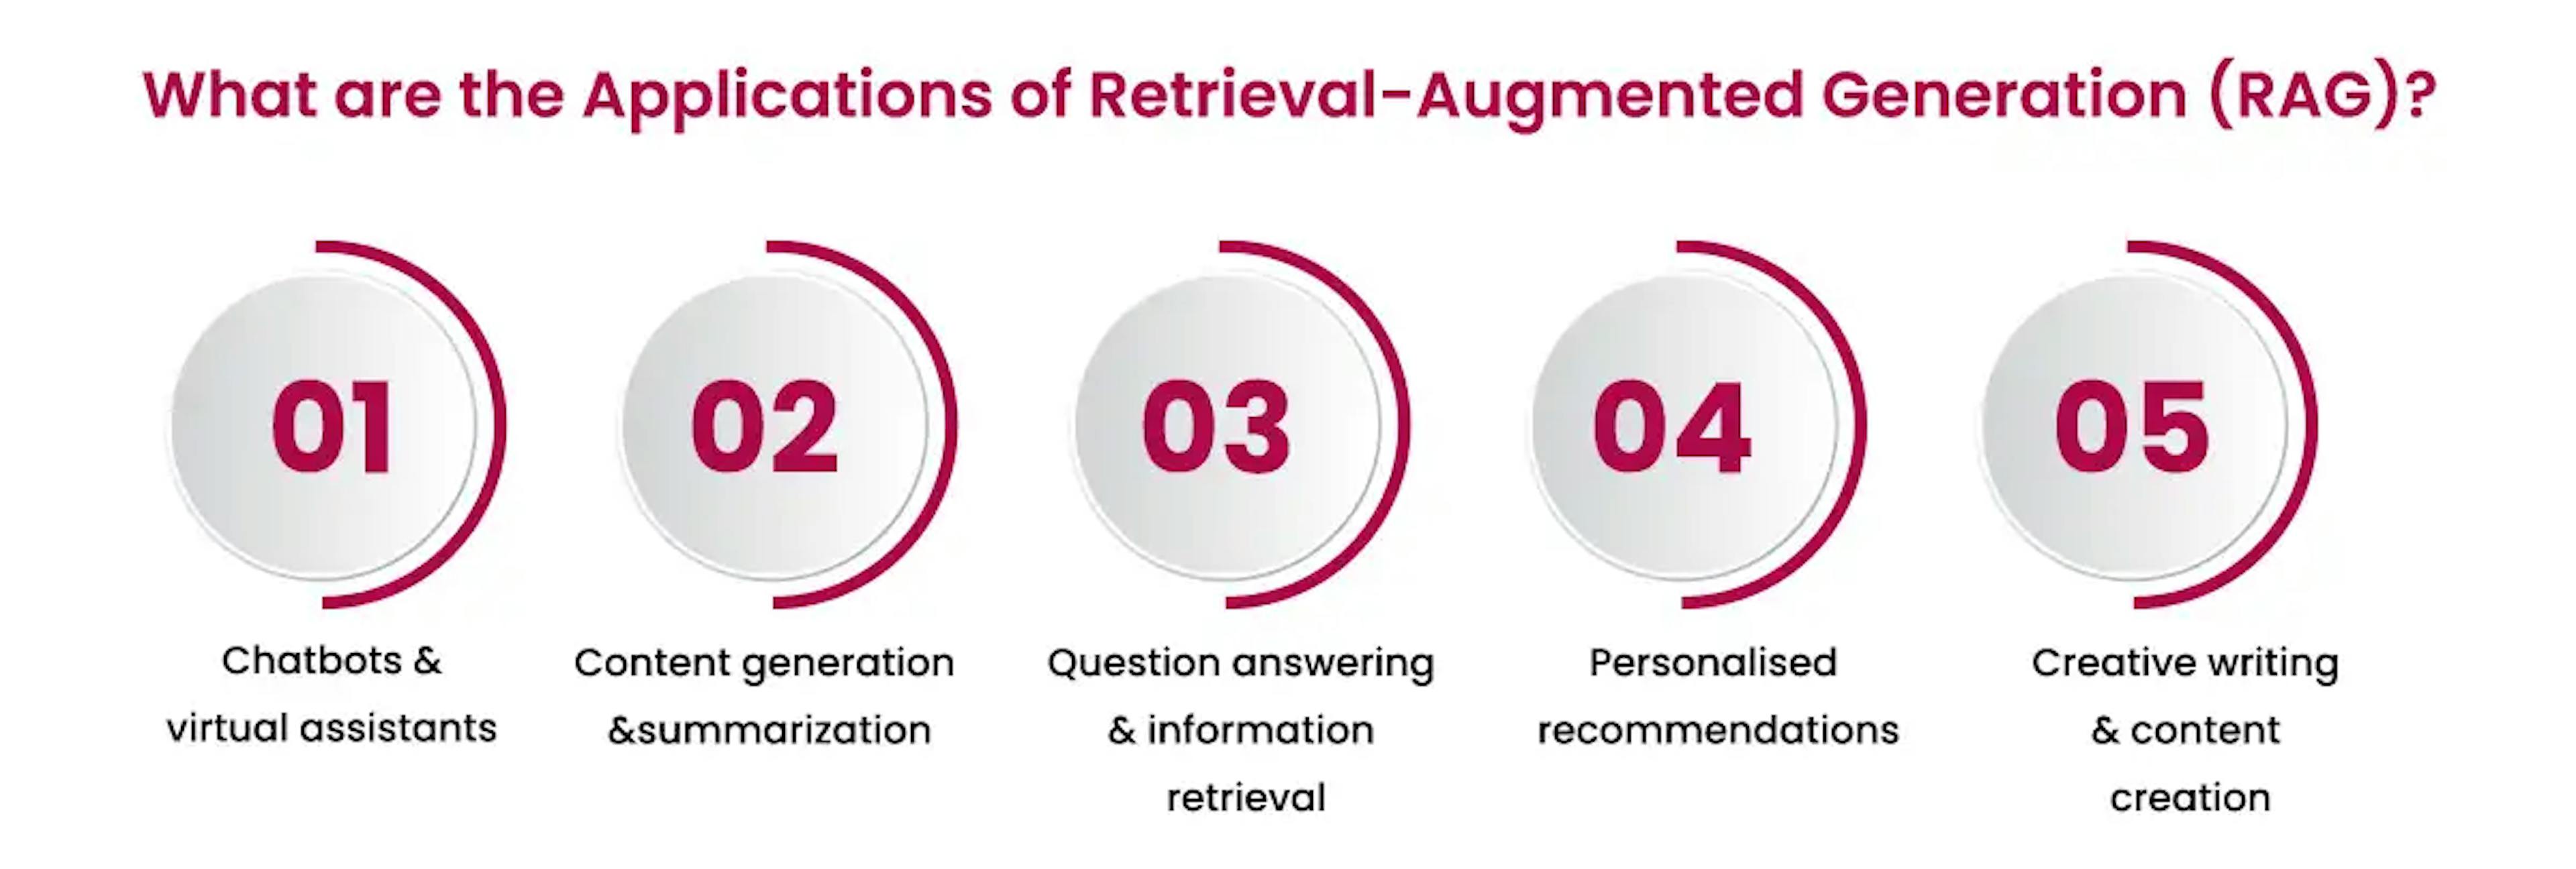 What are the Applications of Retrieval-Augmented Generation (RAG)?